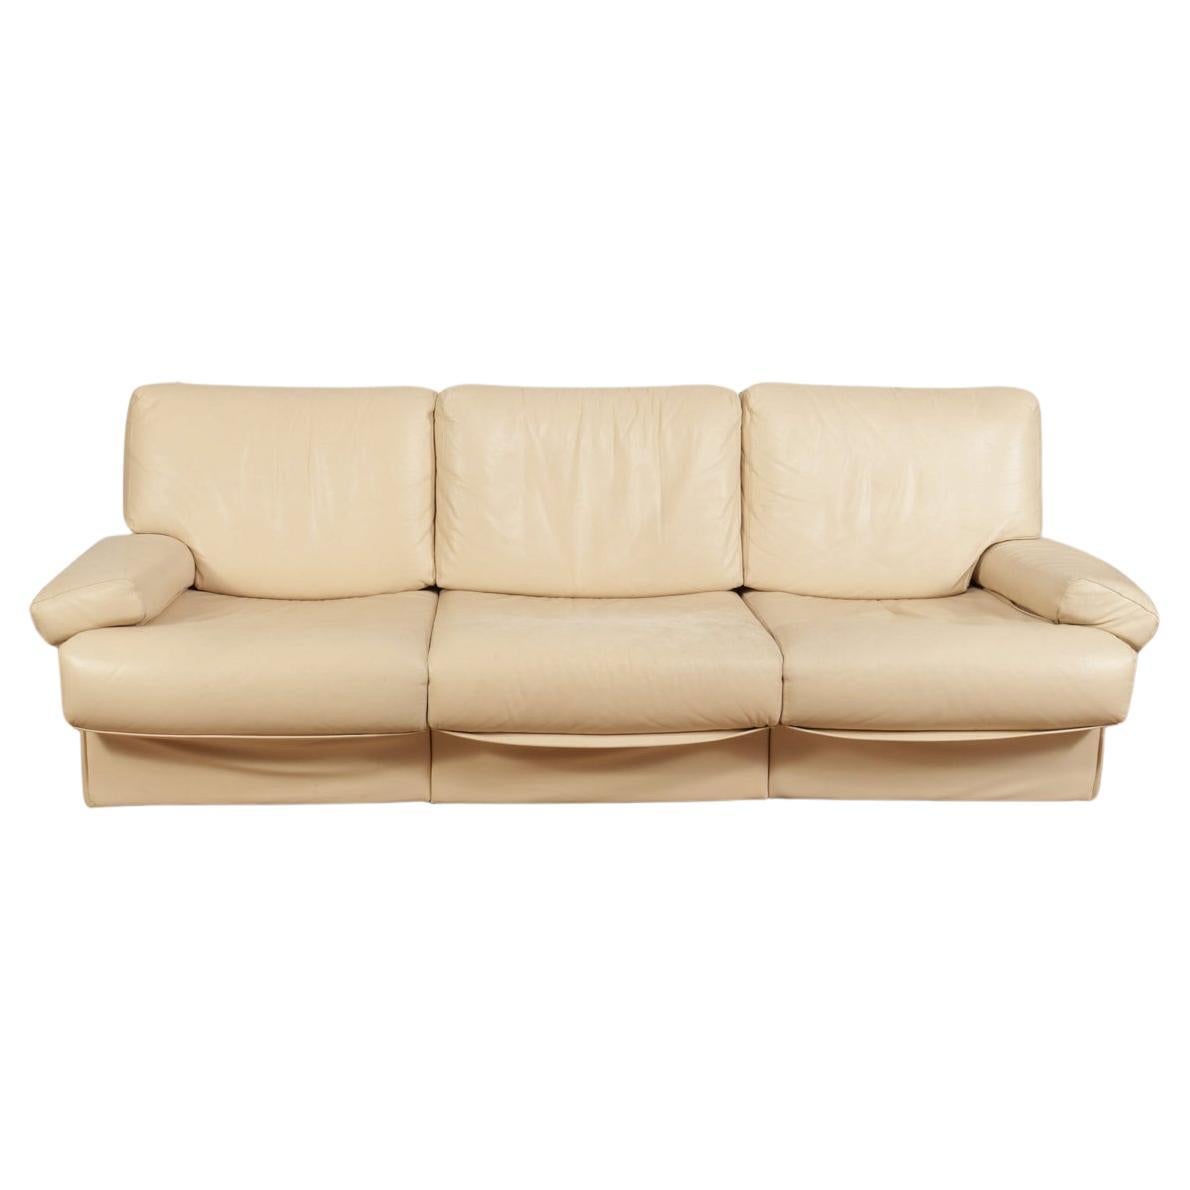 Post modern beautiful beige leather 3 seat sofa by Busnelli For Sale